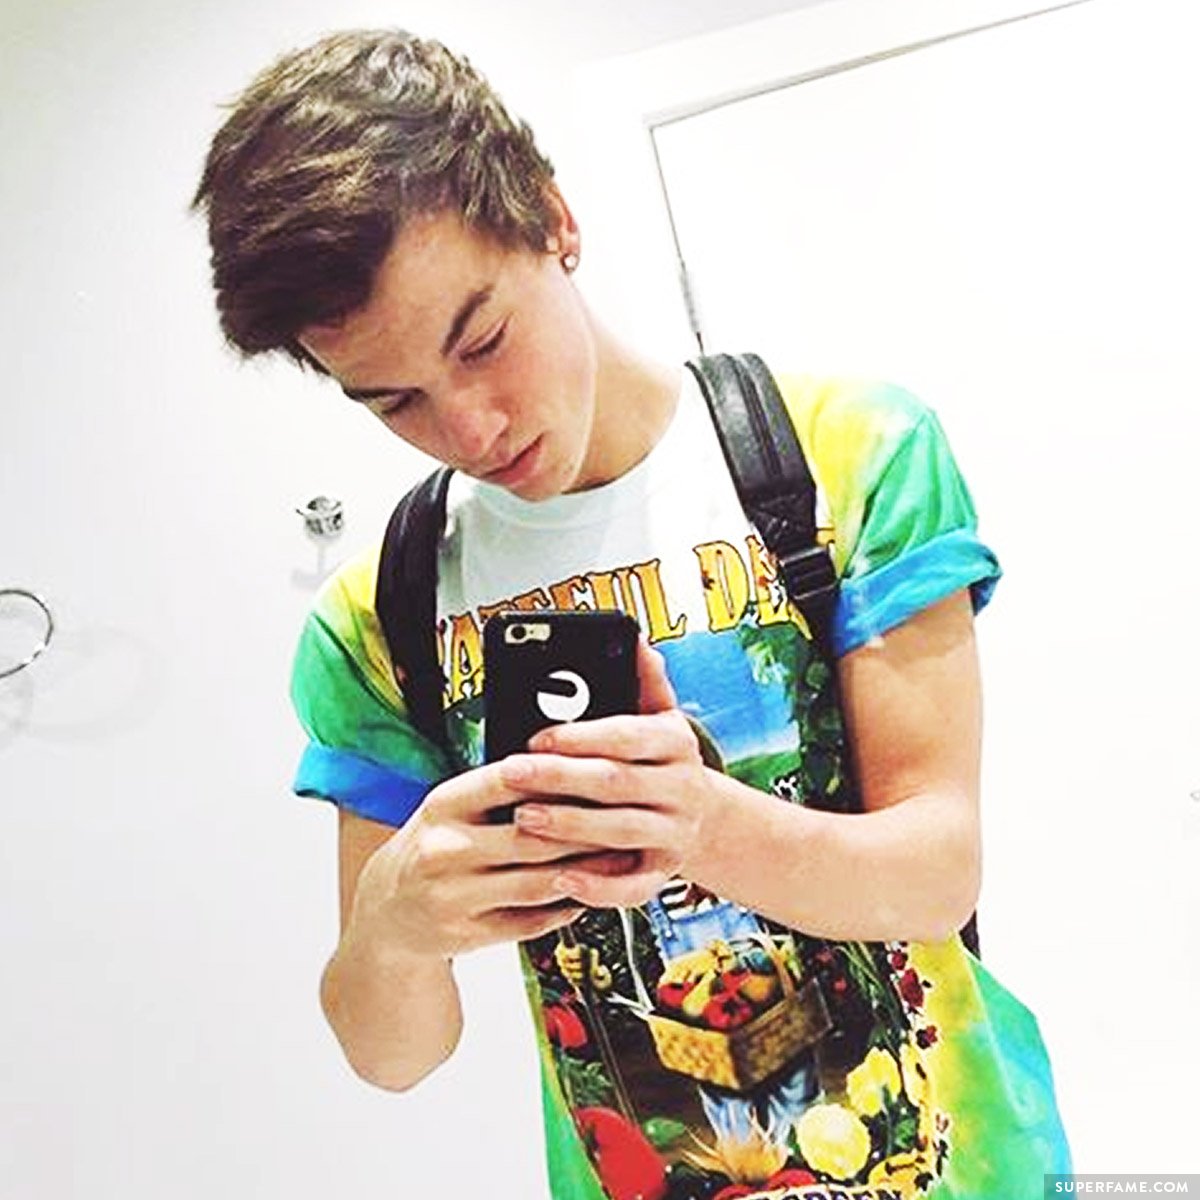 Taylor Caniff in color.